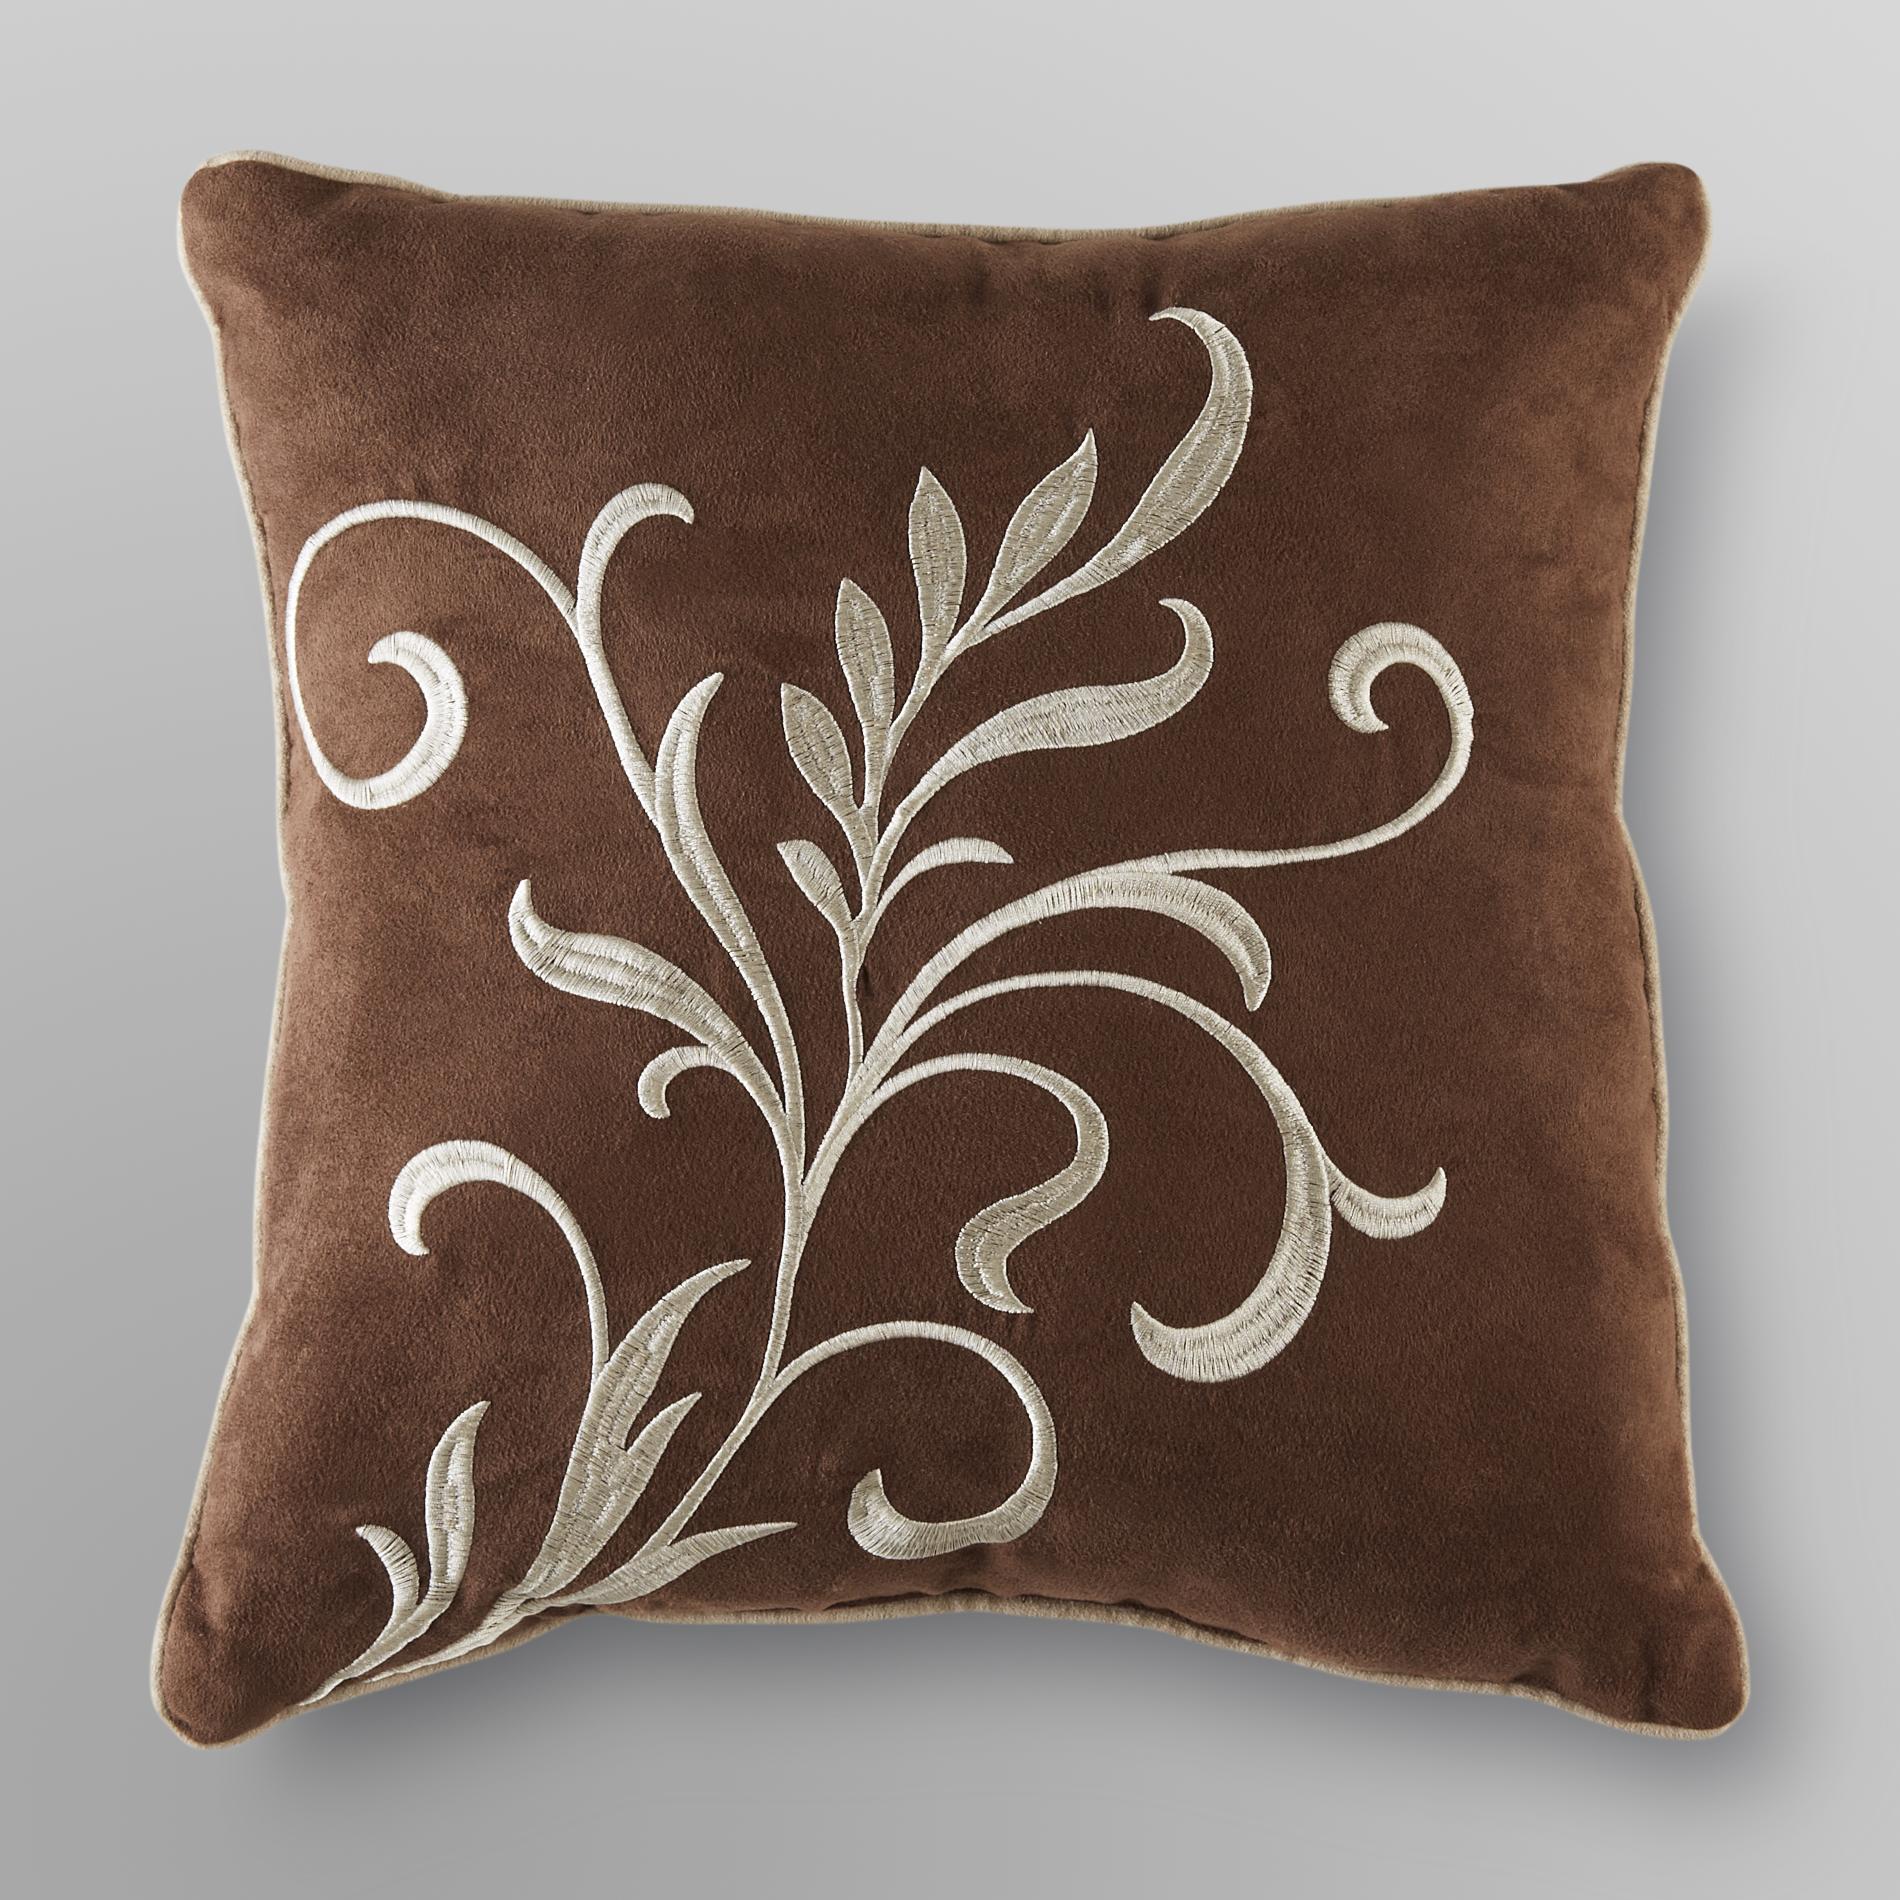 Cannon Lancaster Microsuede Pillow - Scroll